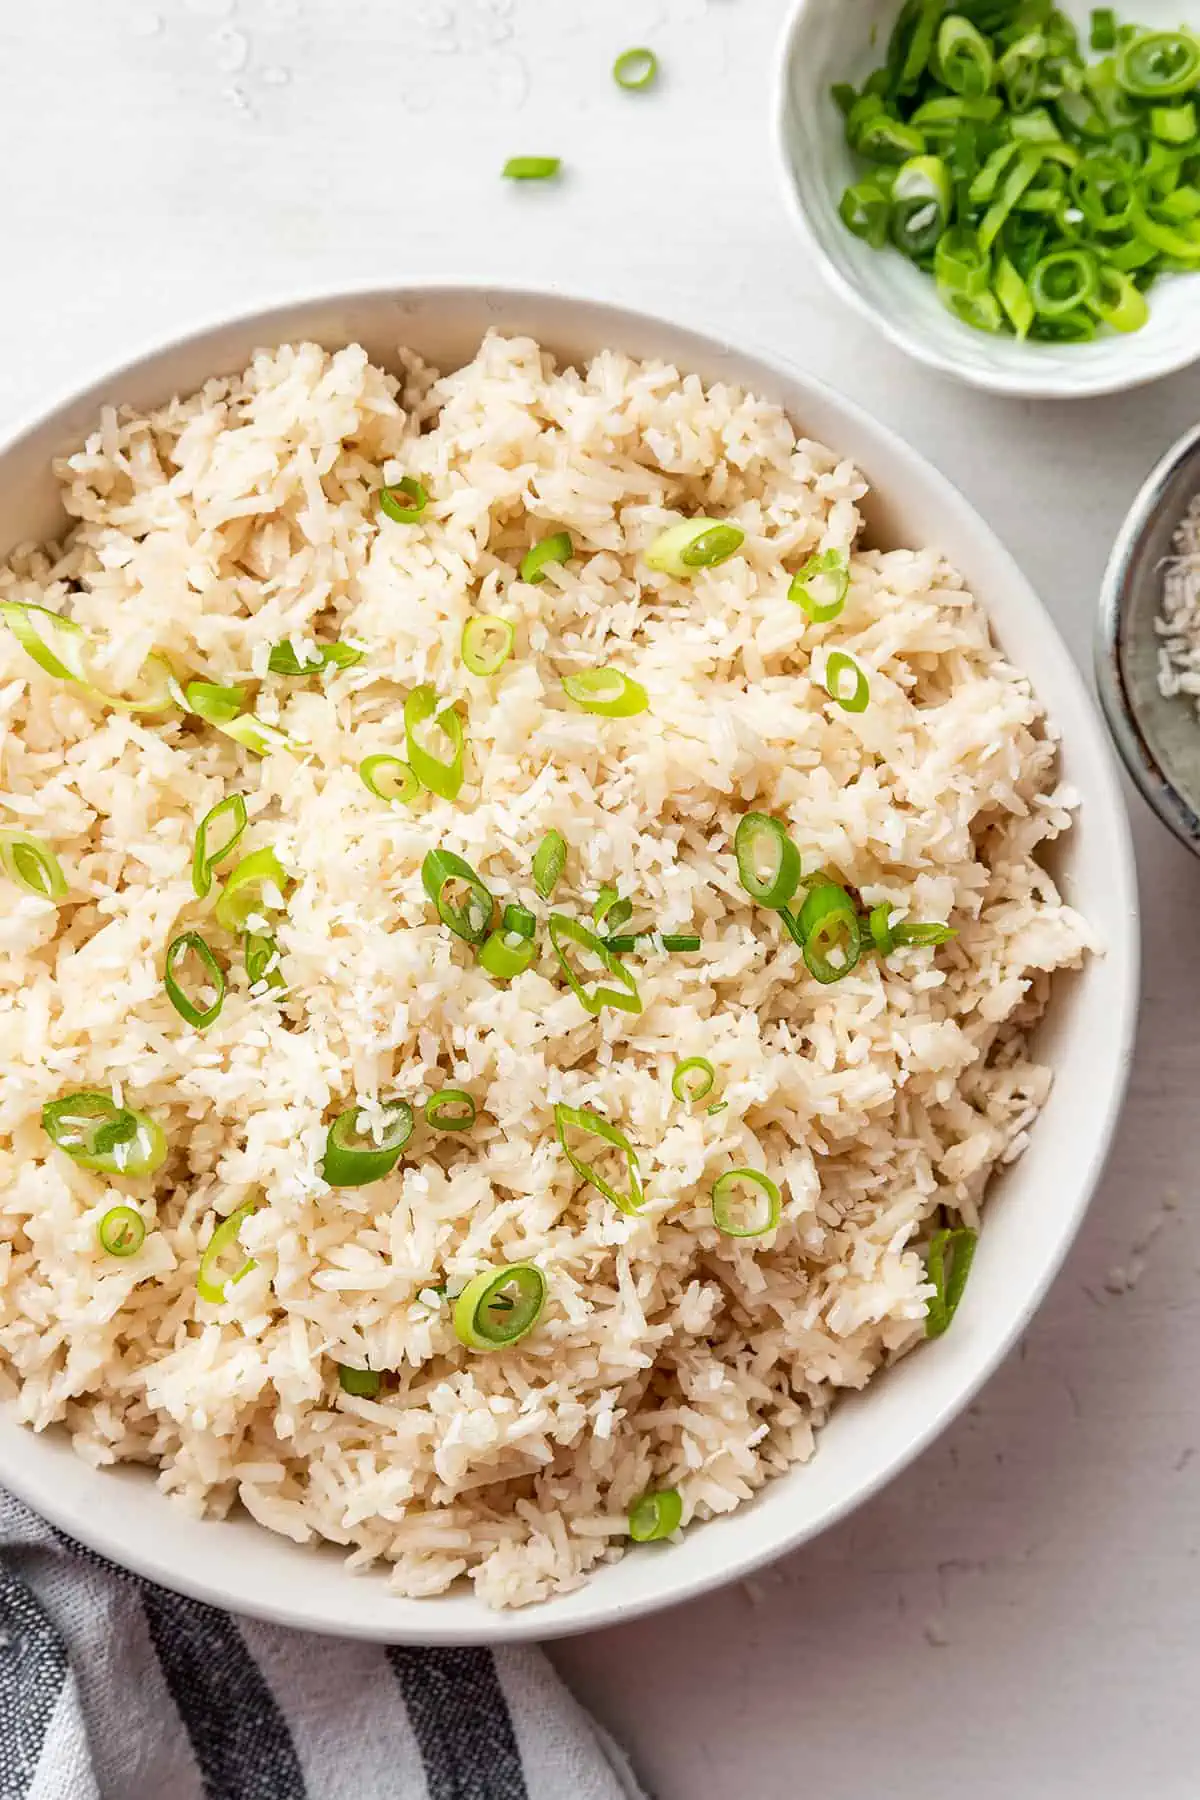 Overhead view of a serving bowl full of coconut rice topped with scallions, and a bowl of scallions.